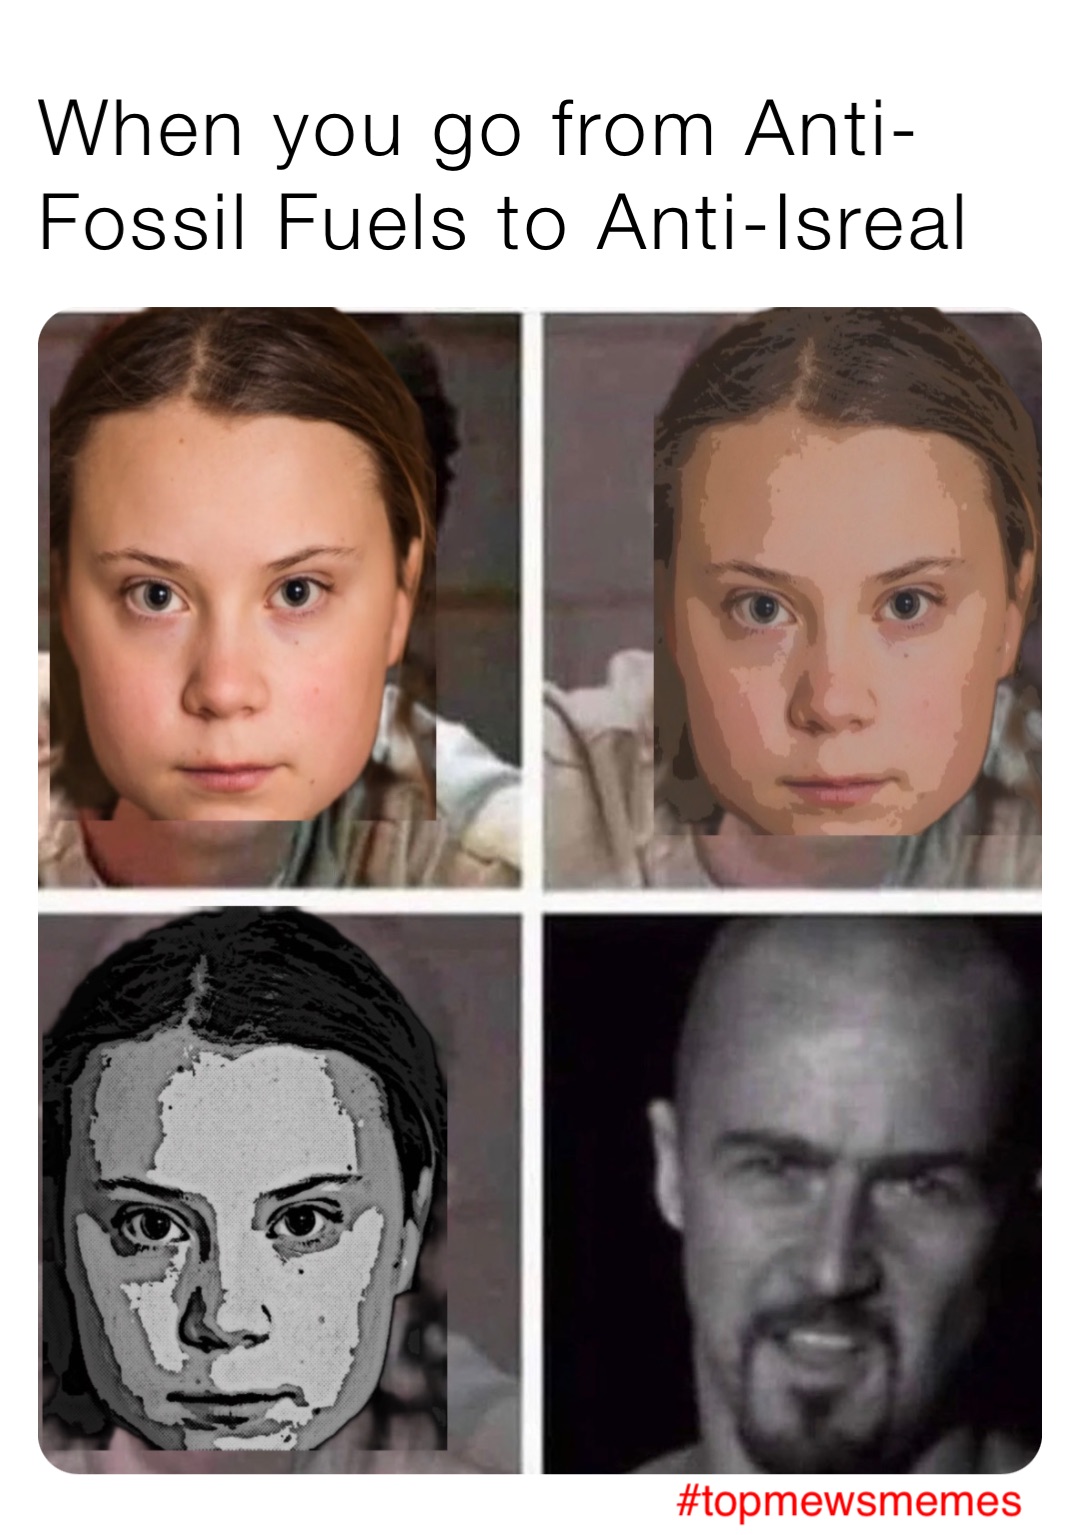 When you go from Anti-Fossil Fuels to Anti-Isreal